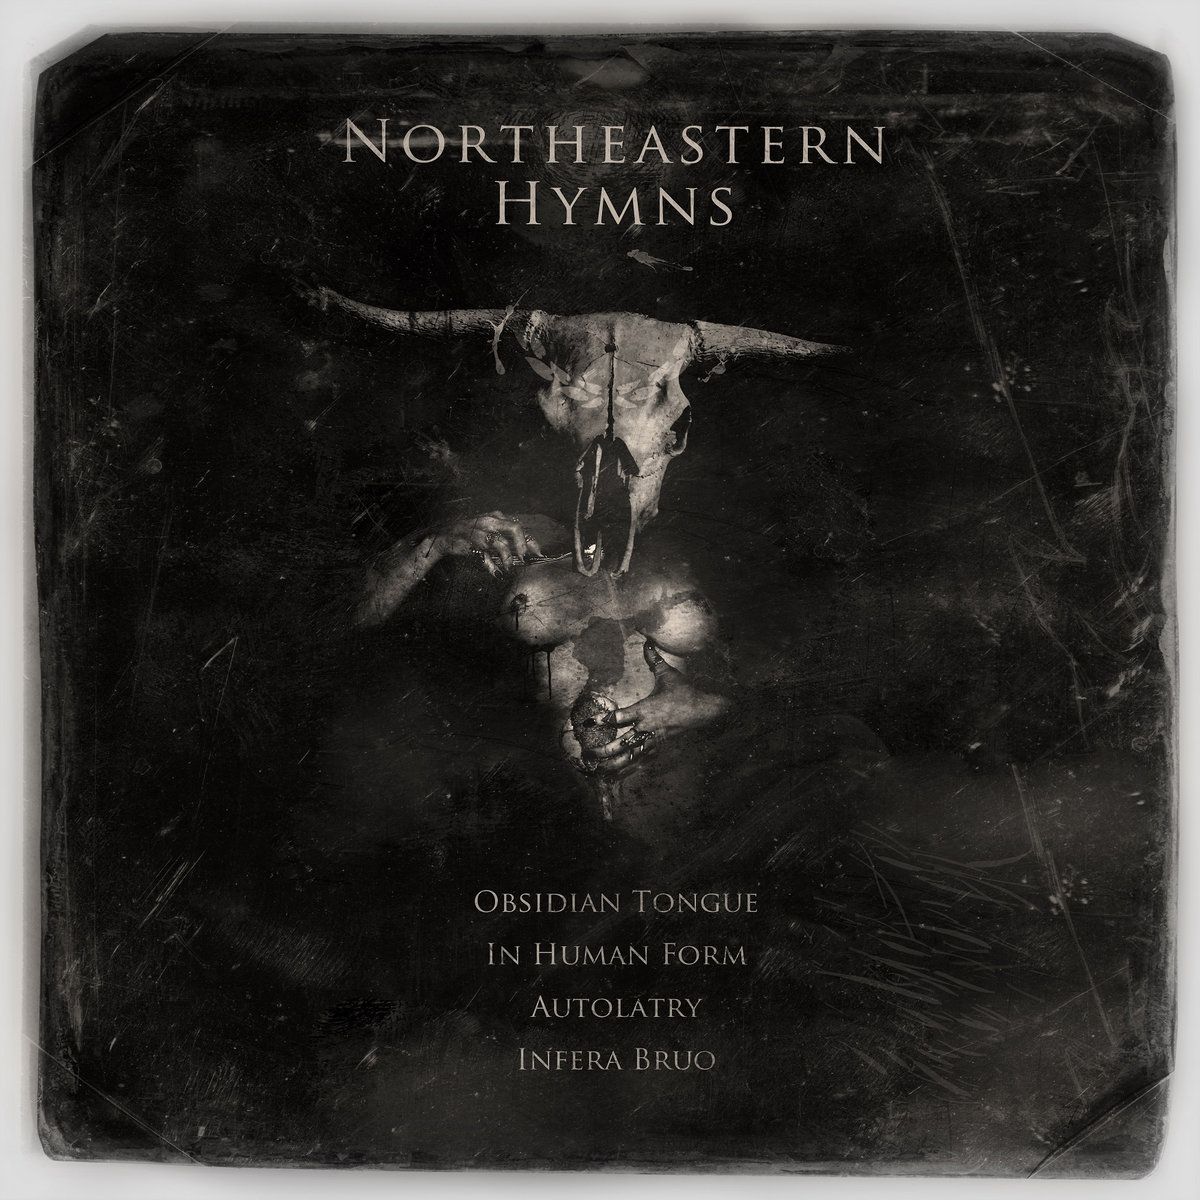 OBSIDIAN TONGUE - Northeastern Hymns cover 